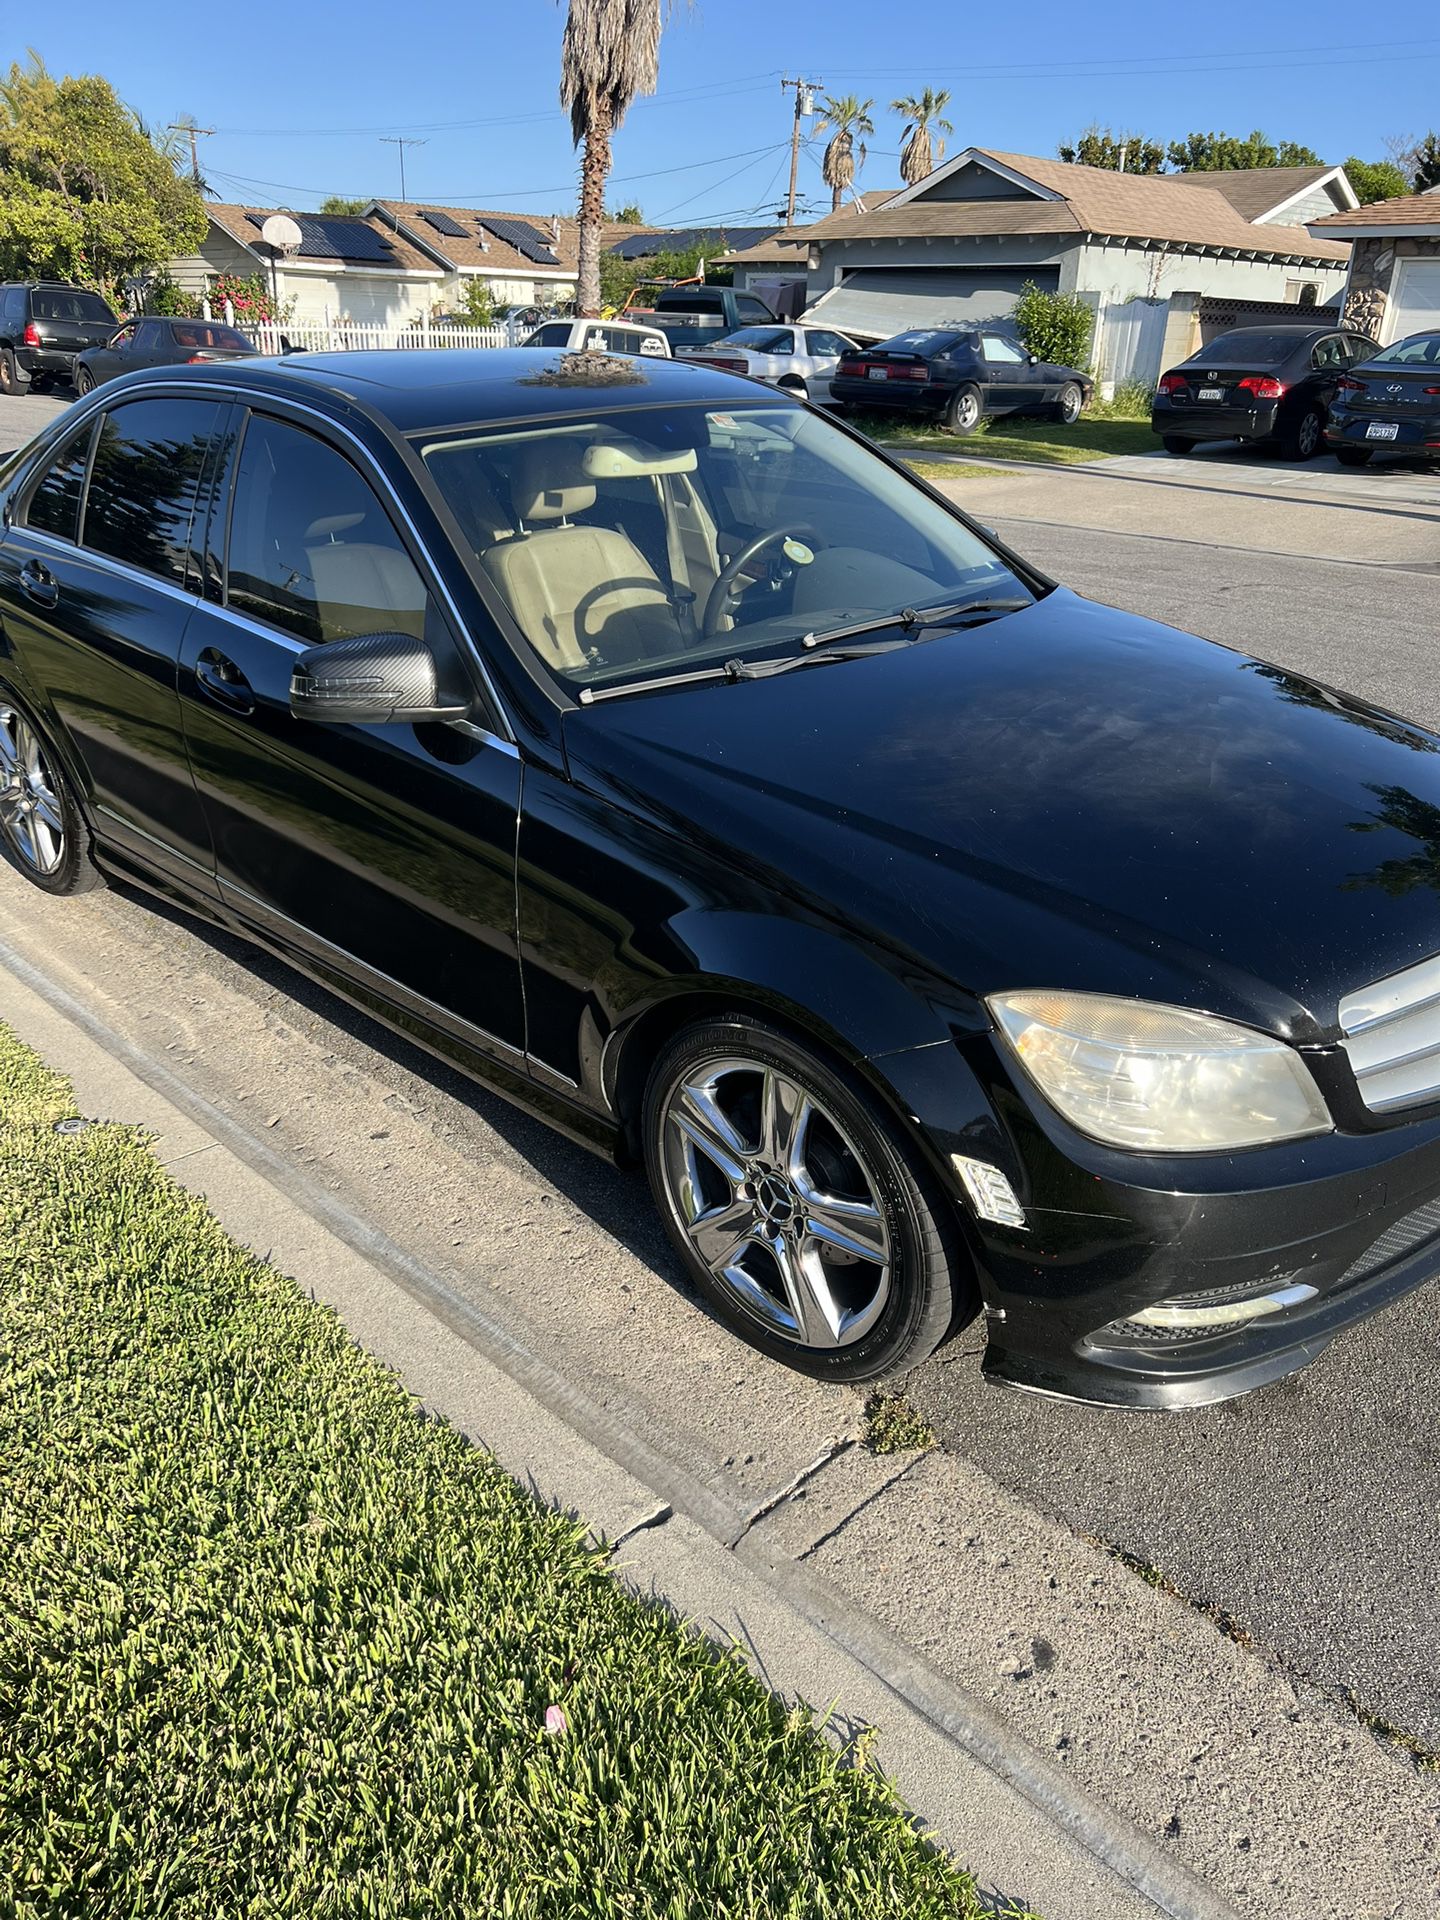 2010 C300 Mercedes Benz Trade For Truck  